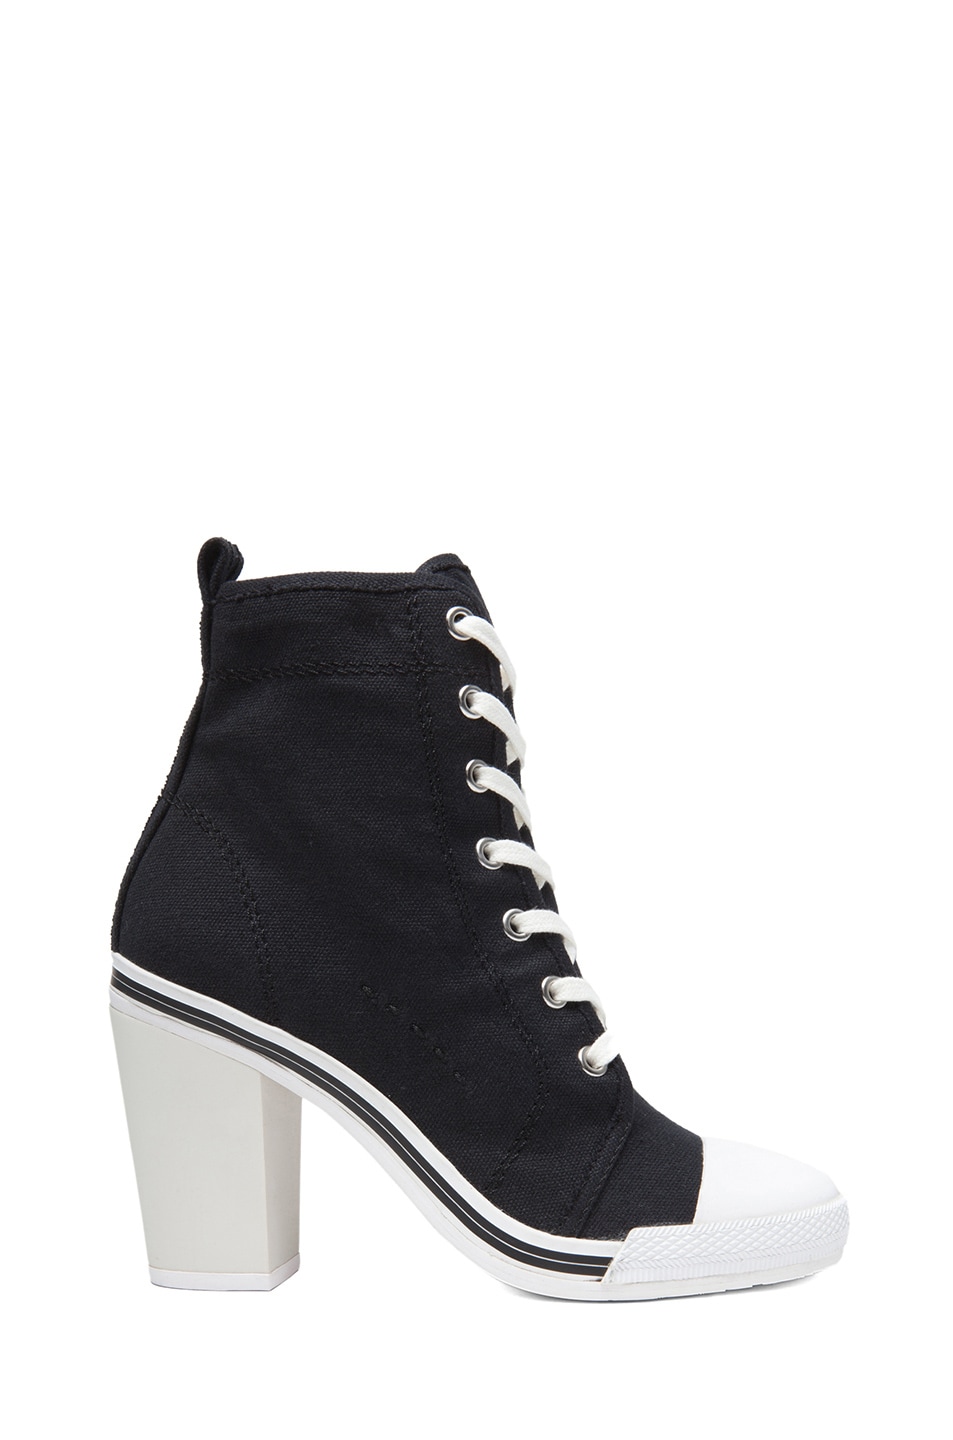 Image 1 of Opening Ceremony x DKNY High Heel Canvas Sneakers in Black